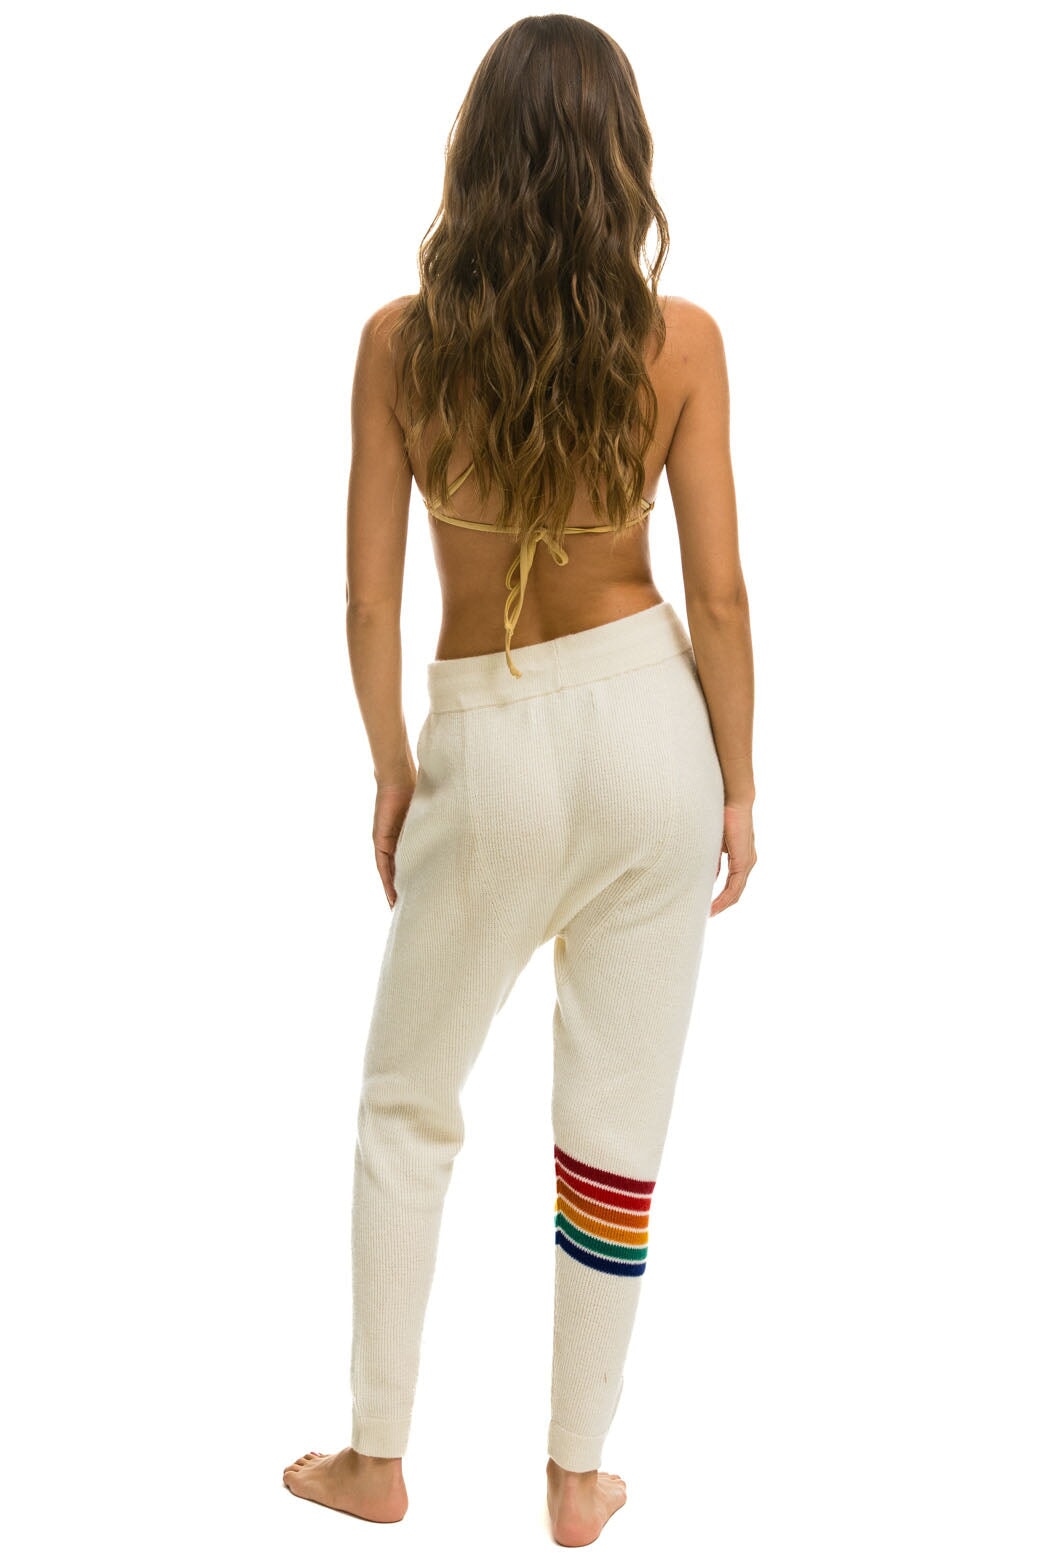 WOMEN&#39;S RAINBOW 6 STRIPE CASHMERE RELAXED FIT PANT - VINTAGE WHITE Women&#39;s Sweatpants Aviator Nation 